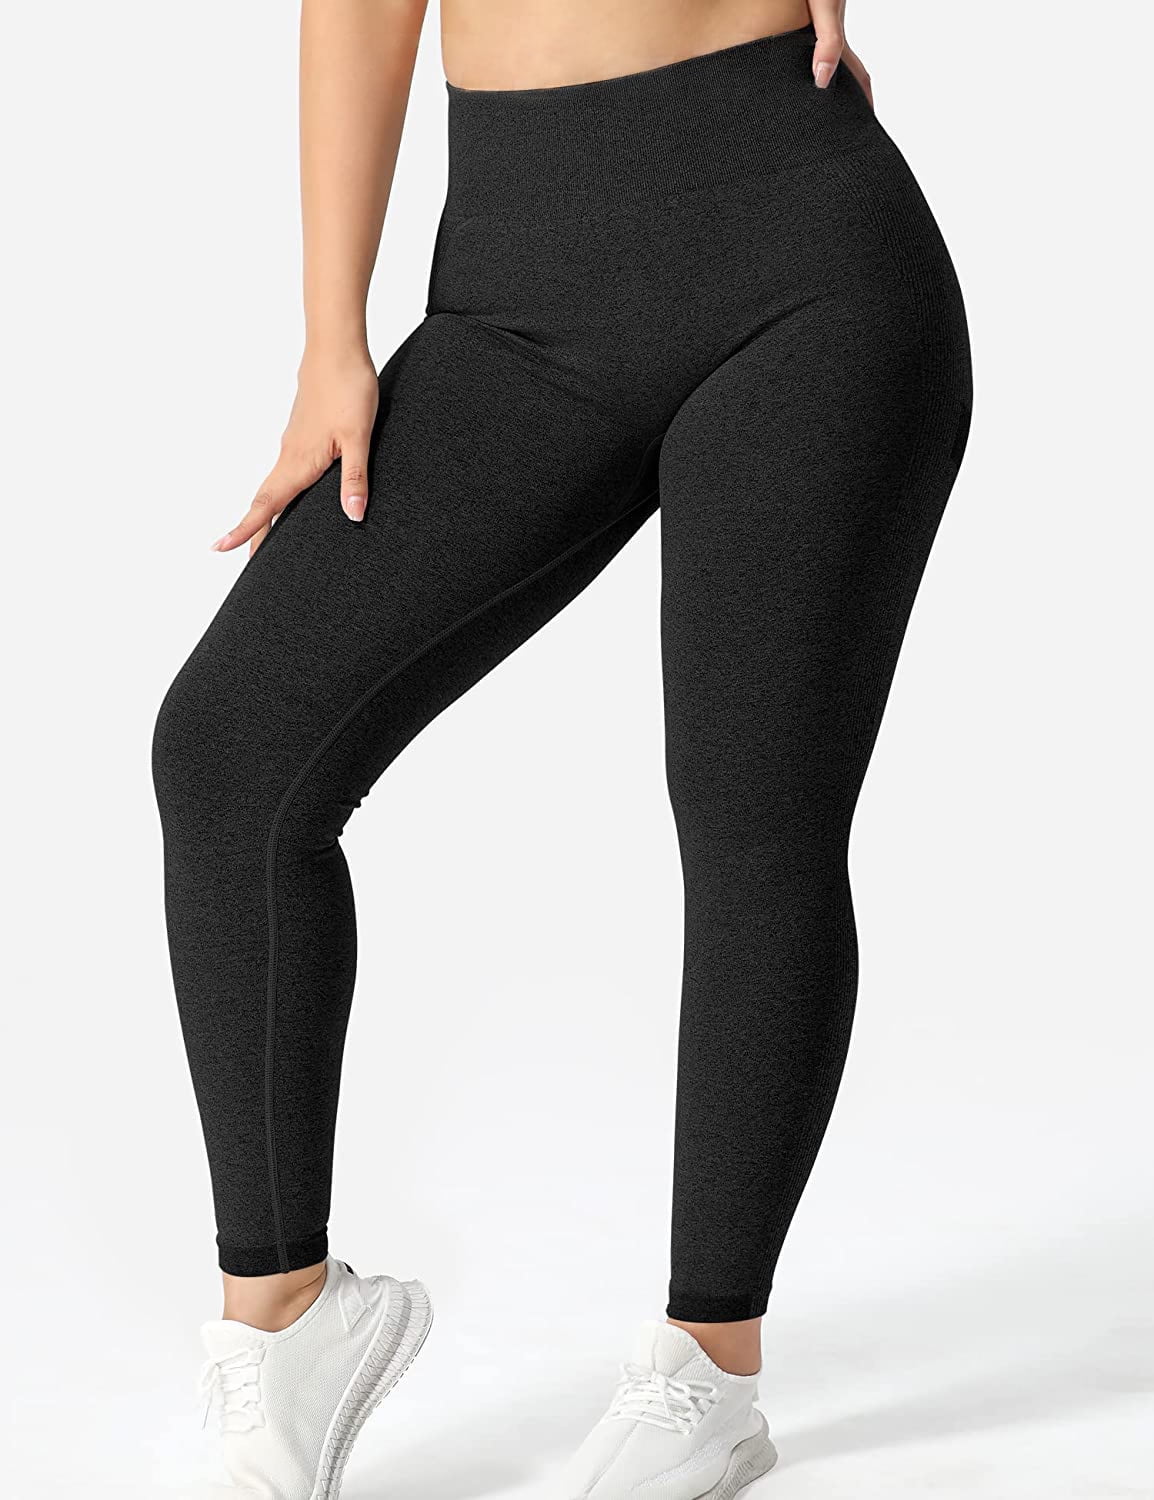 High Waist Geometric 3D Print Gym Yogalicious Leggings With Scrunch Design  For Women Push Up, Gradient Color, Plus Size 210604 From Cong00, $12.05